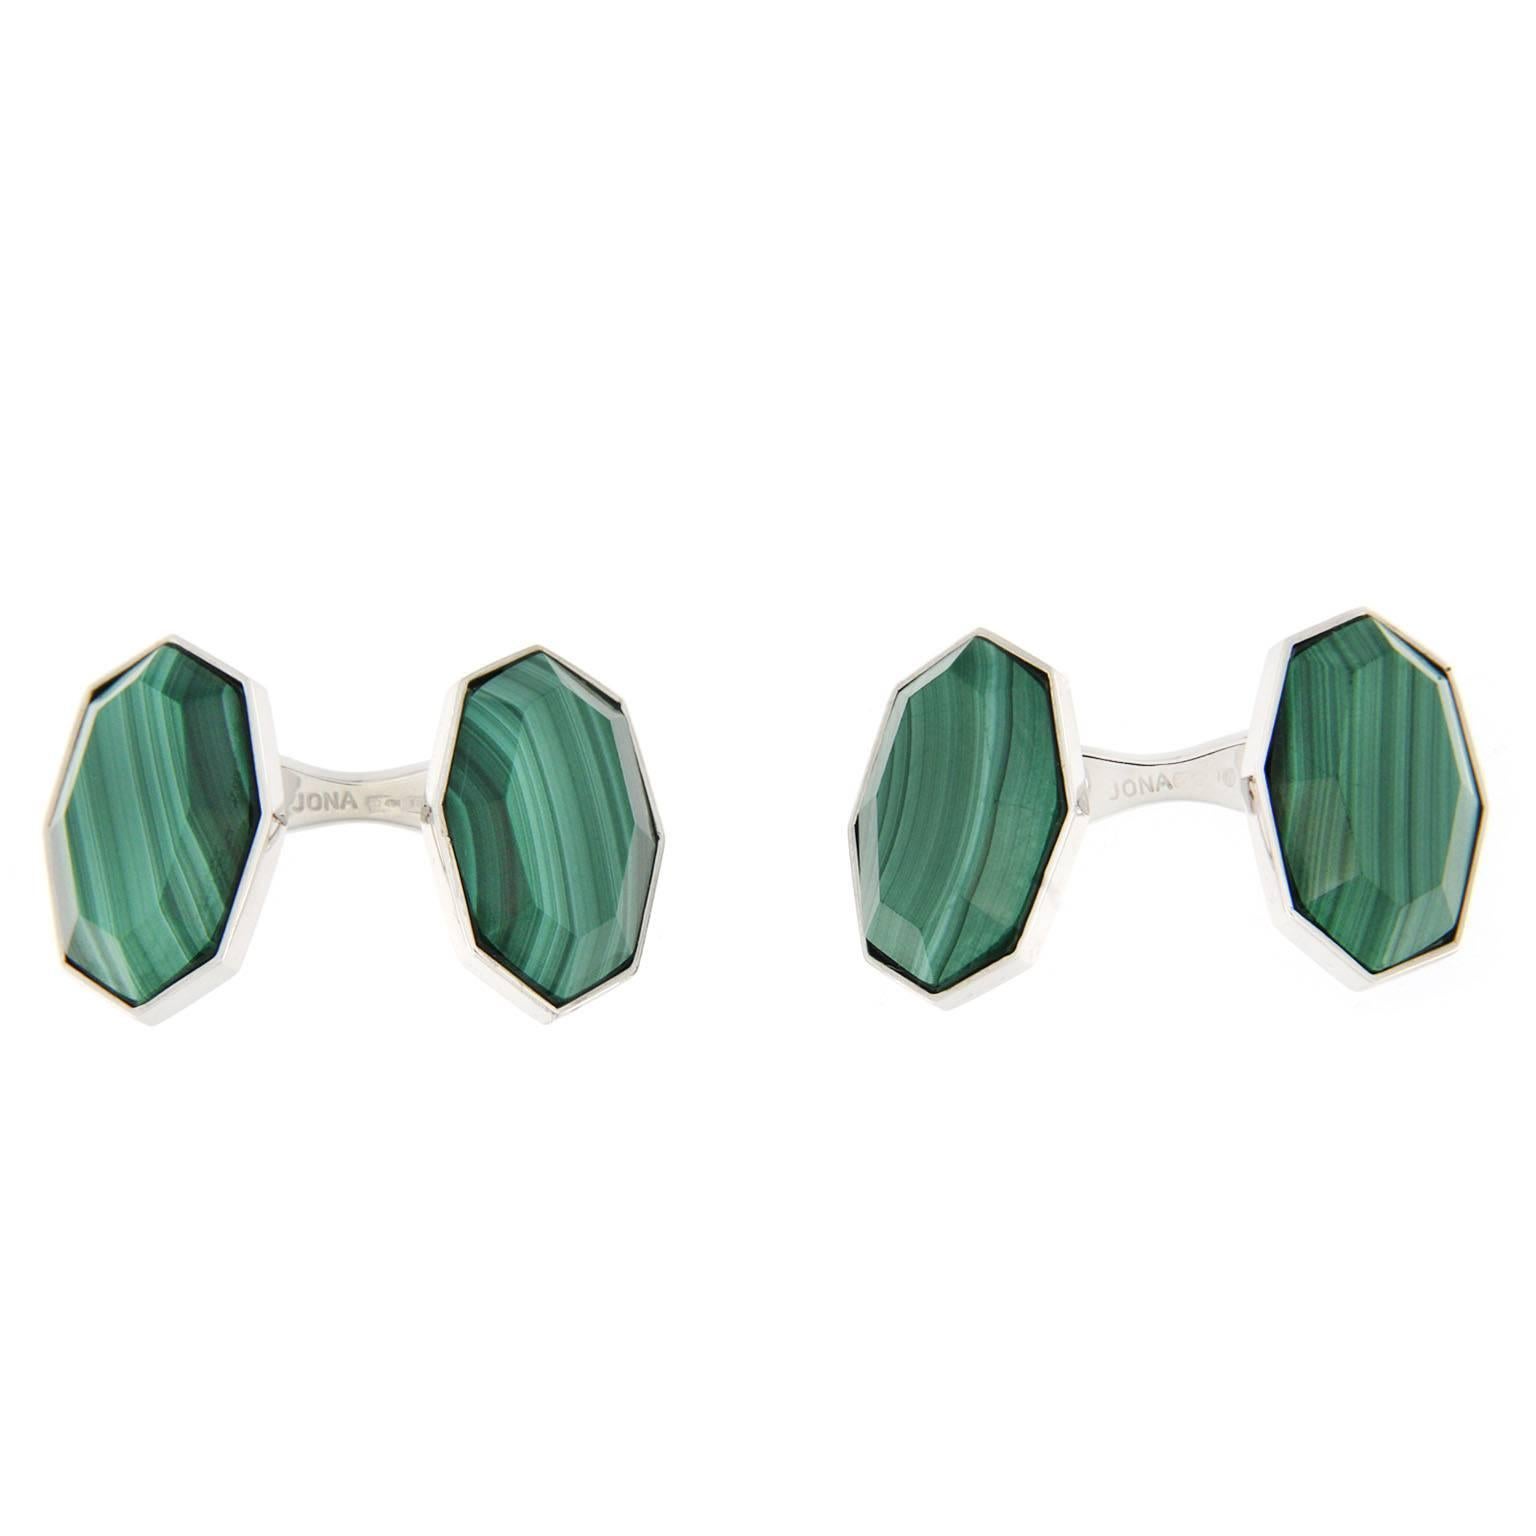 Jona design collection, crafted in Italy, rhodium plated sterling silver faceted Malachite cufflinks. Marked Jona 925.   

All Jona jewelry is new and has never been previously owned or worn. Each item will arrive at your door beautifully gift